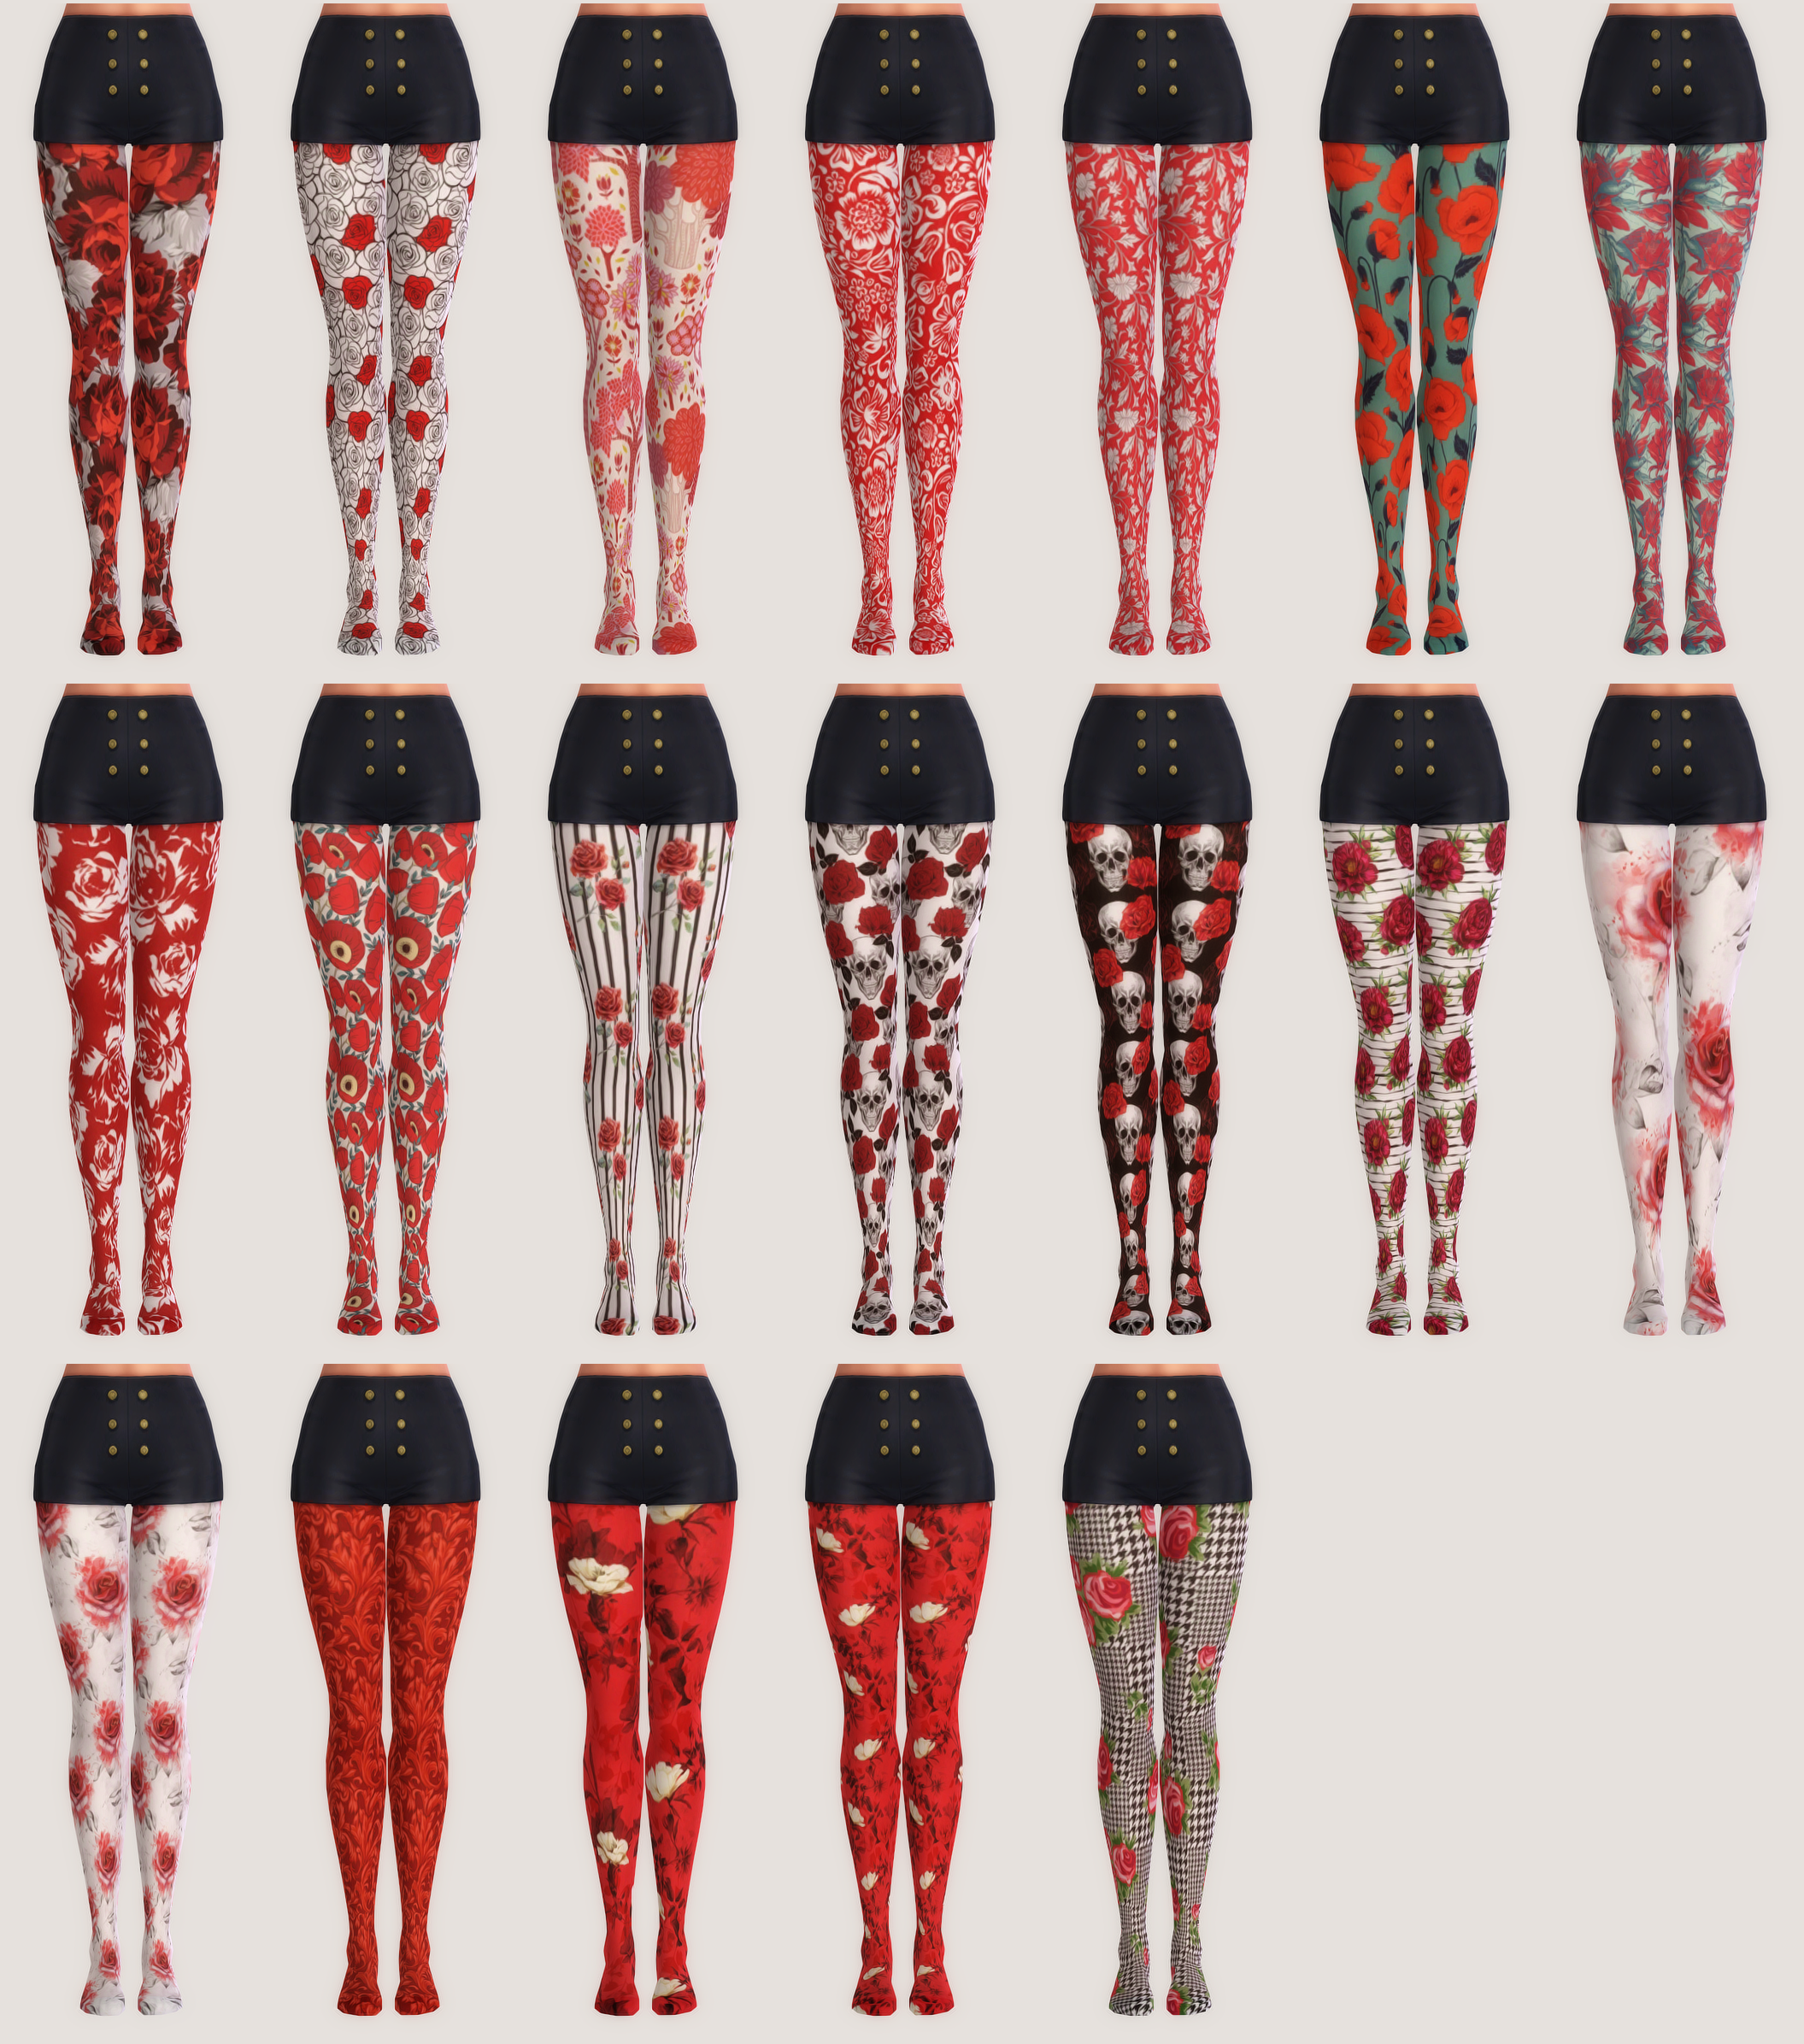 Pink Floral Tights - The Sims 4 Create a Sim - CurseForge